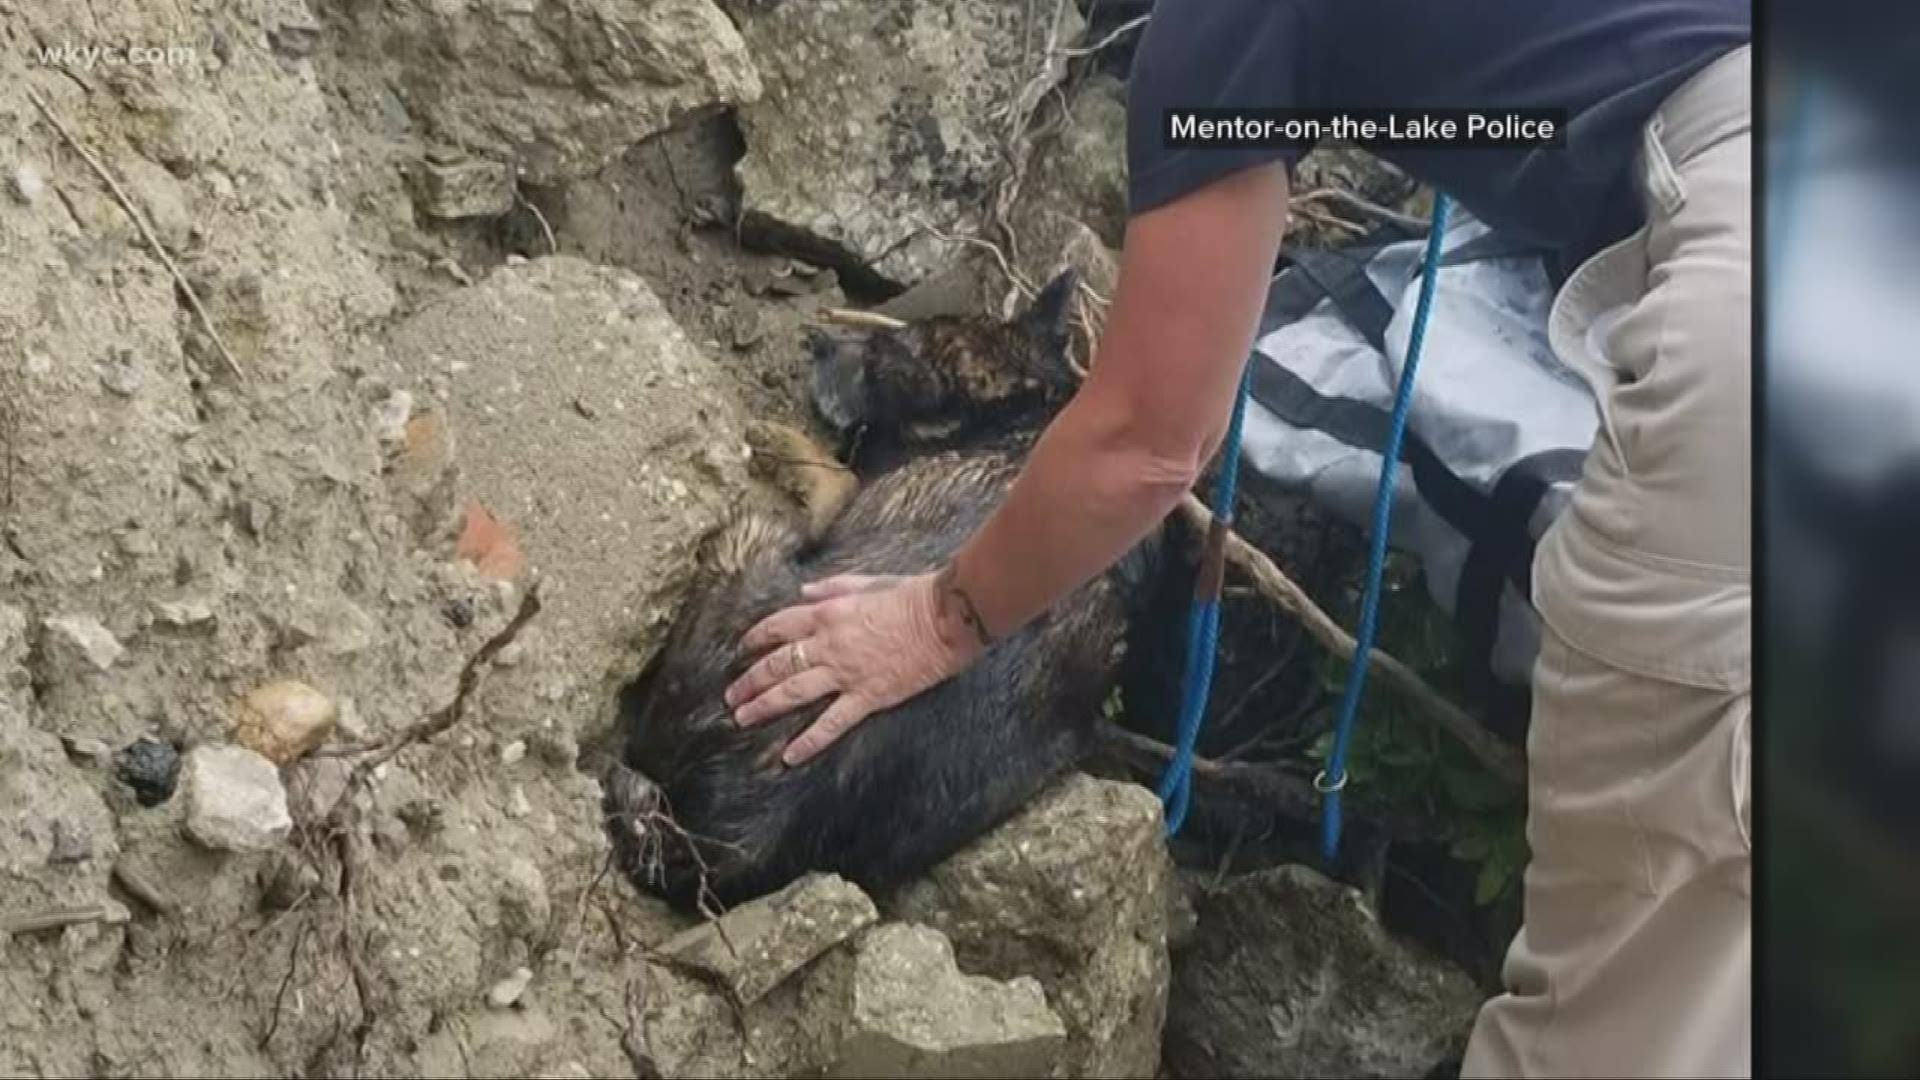 Team of people work to save life of dog in Lake county